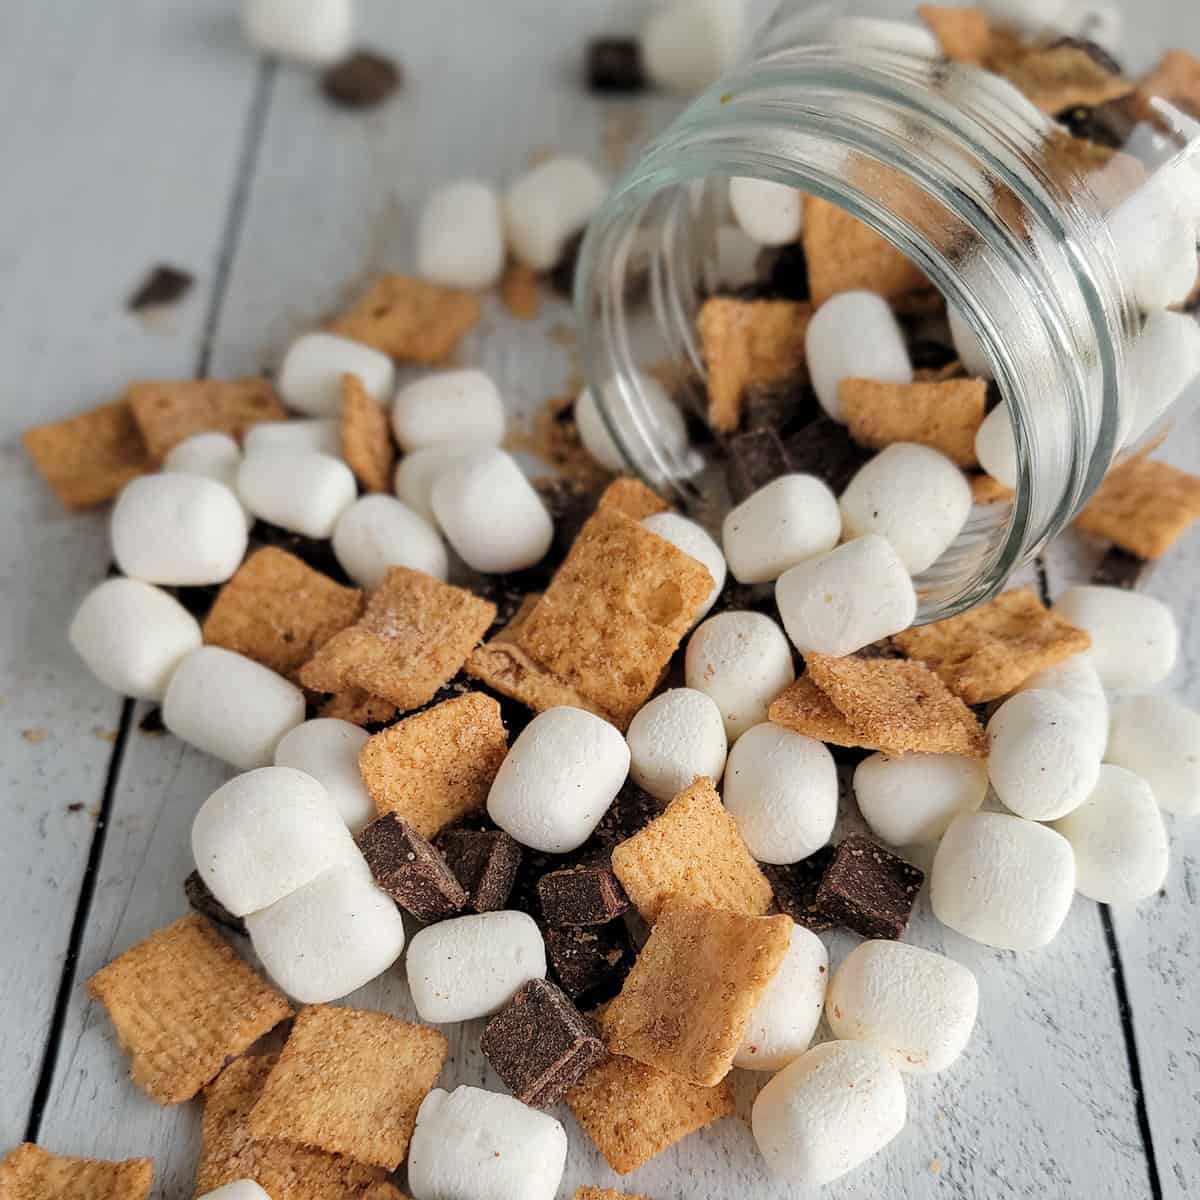 Crunchy S’mores Mix with Dehydrated Marshmallows